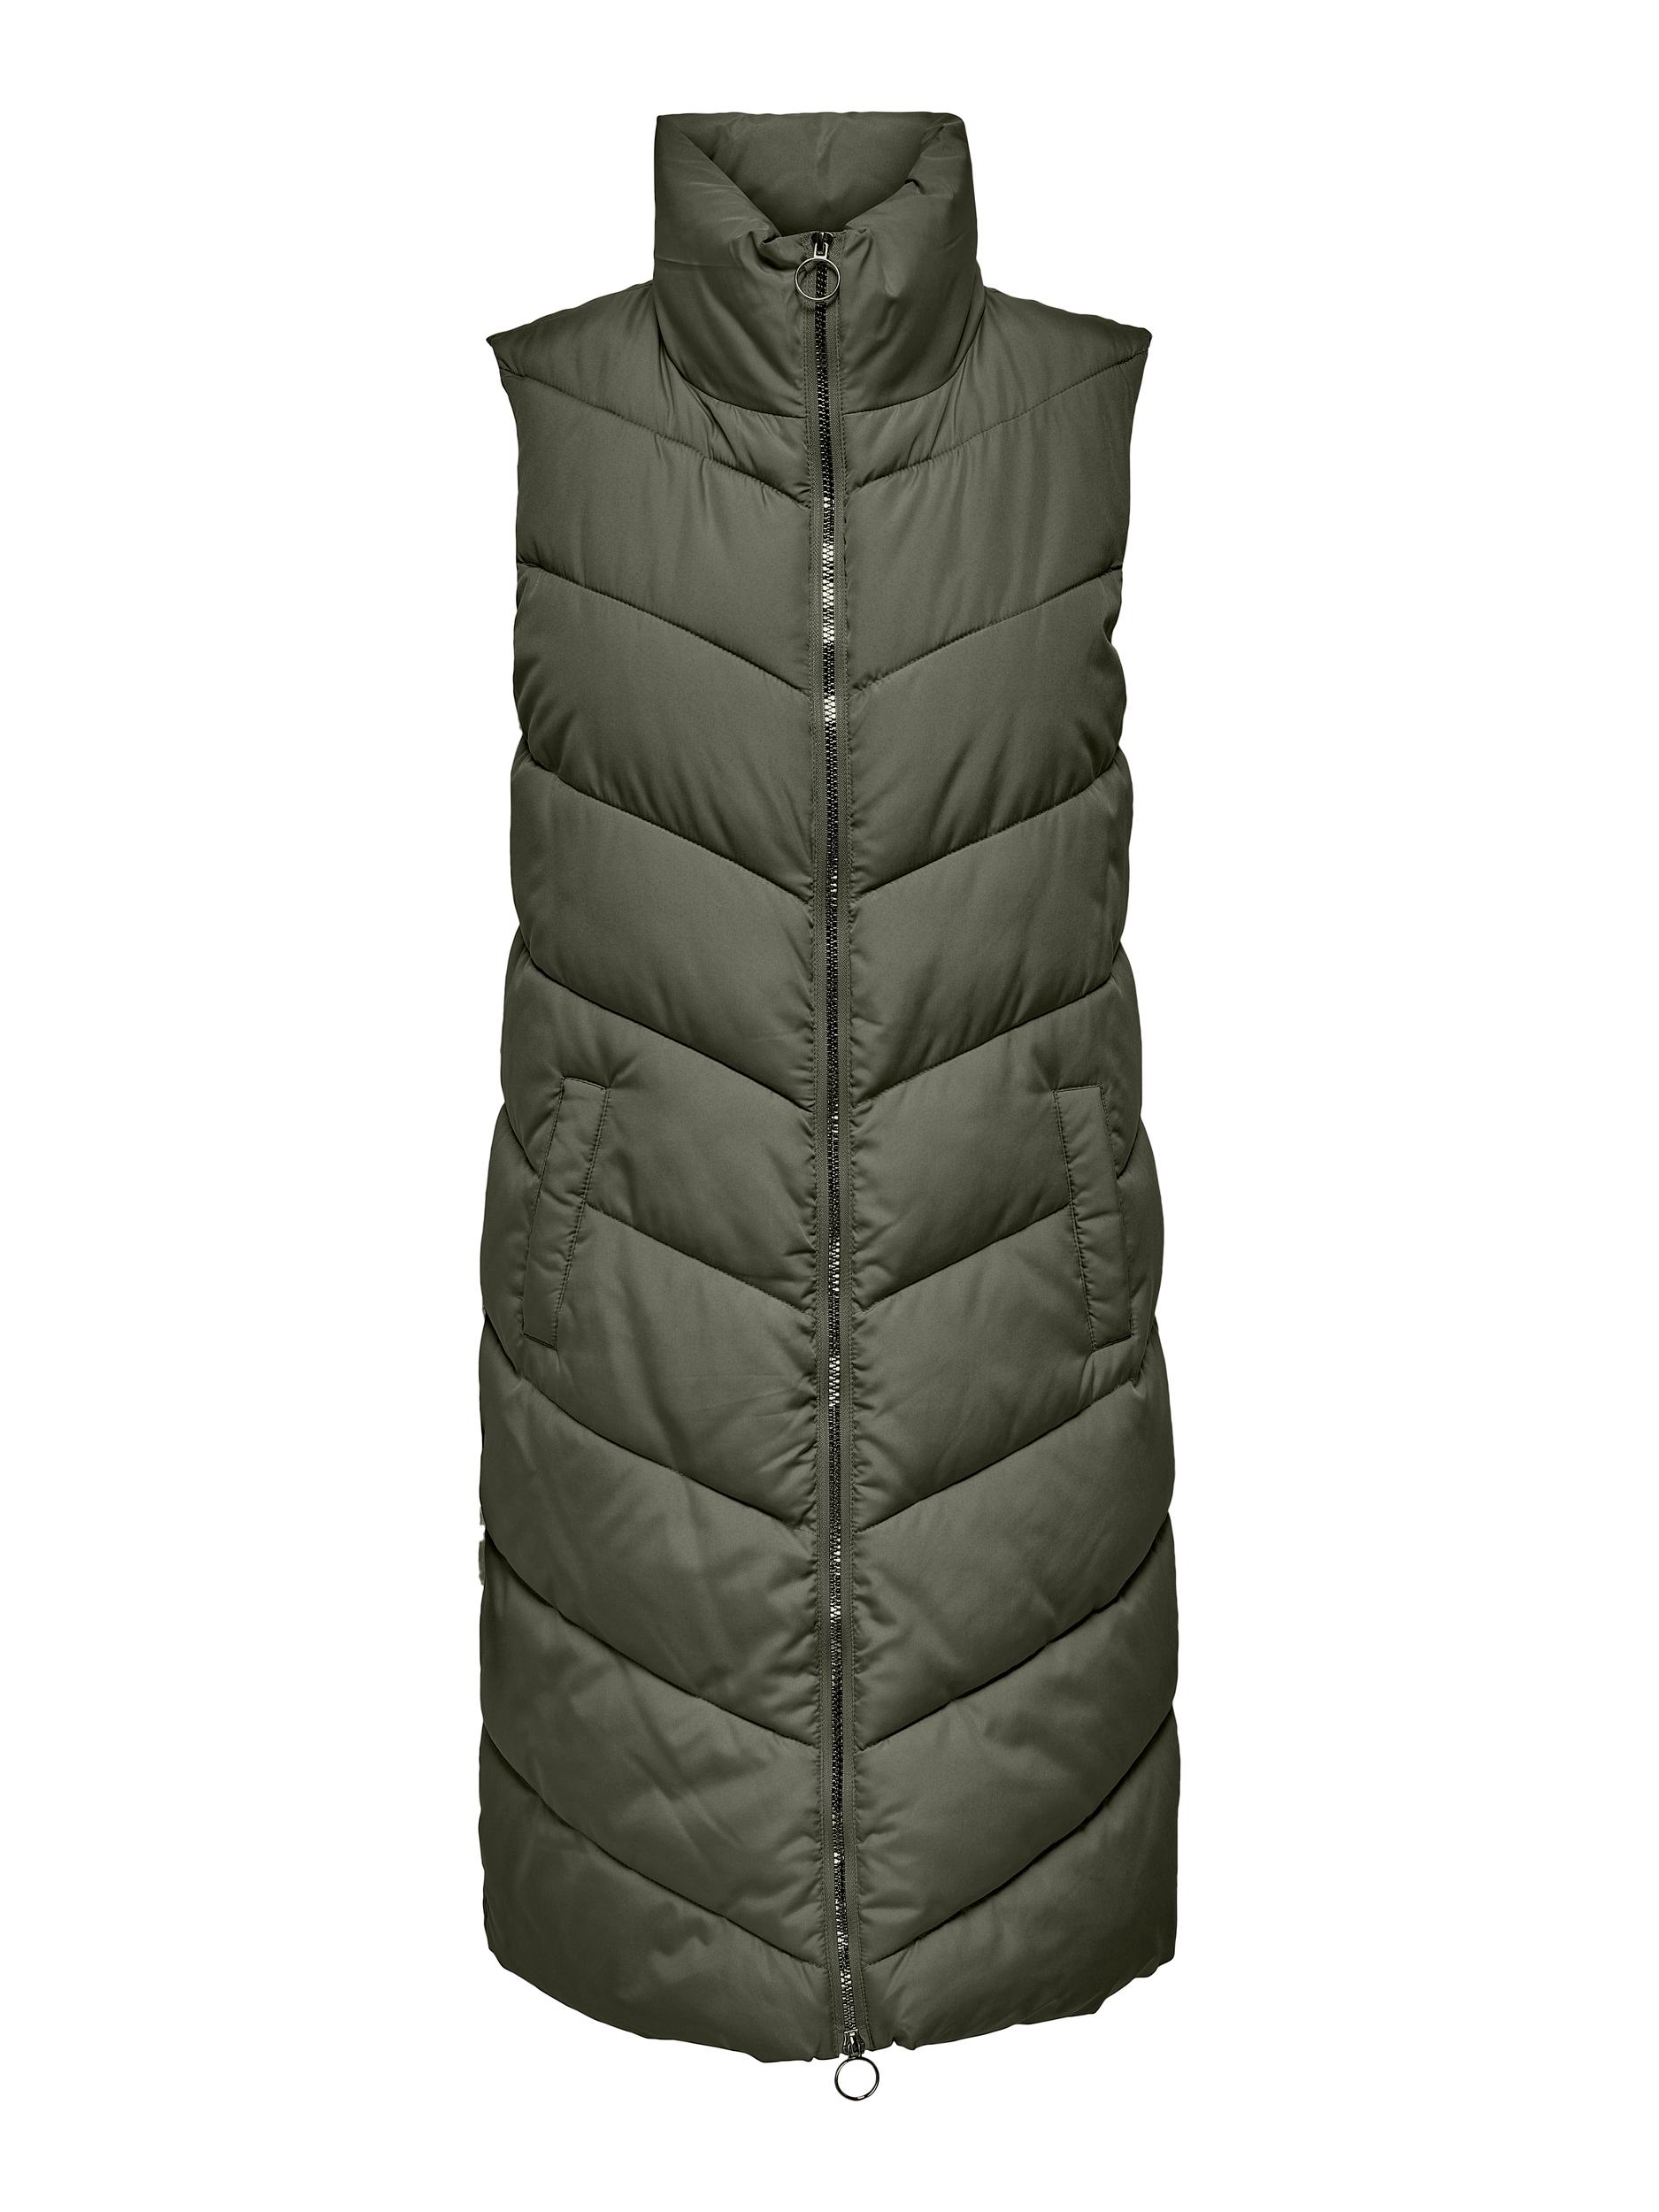  Finno Lang Vest, Forest Night, XS